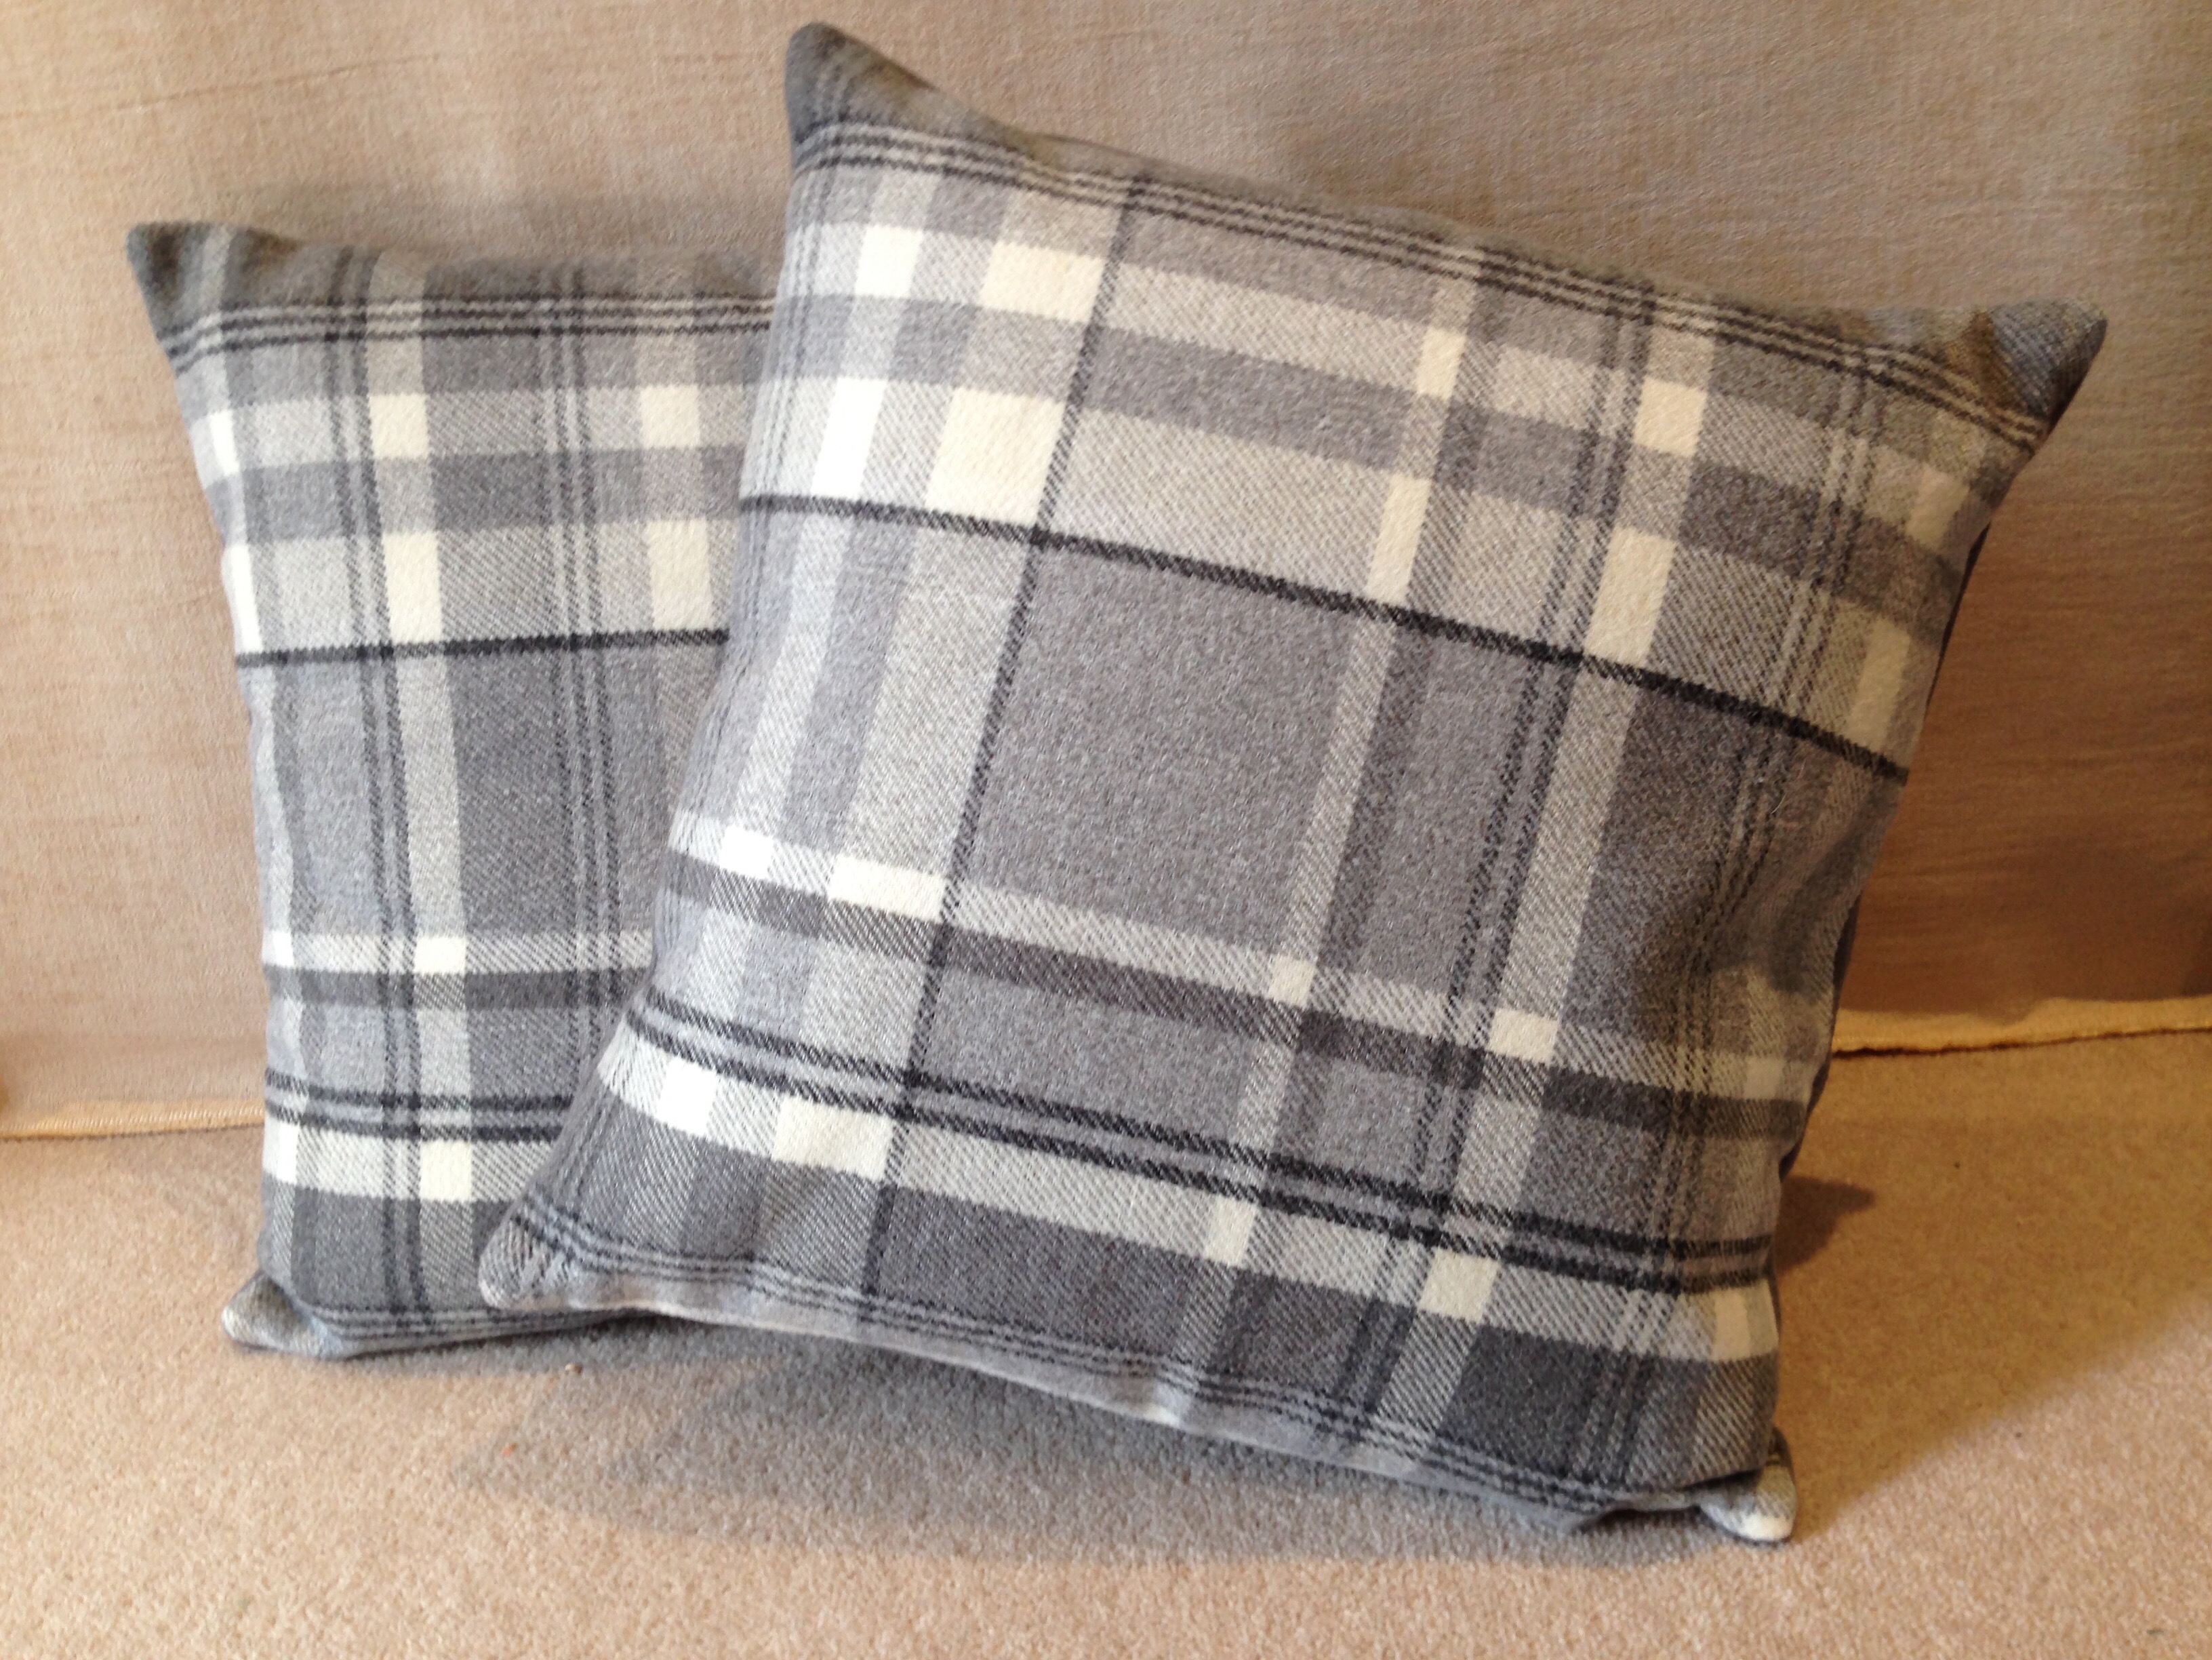 Checked cushion covers